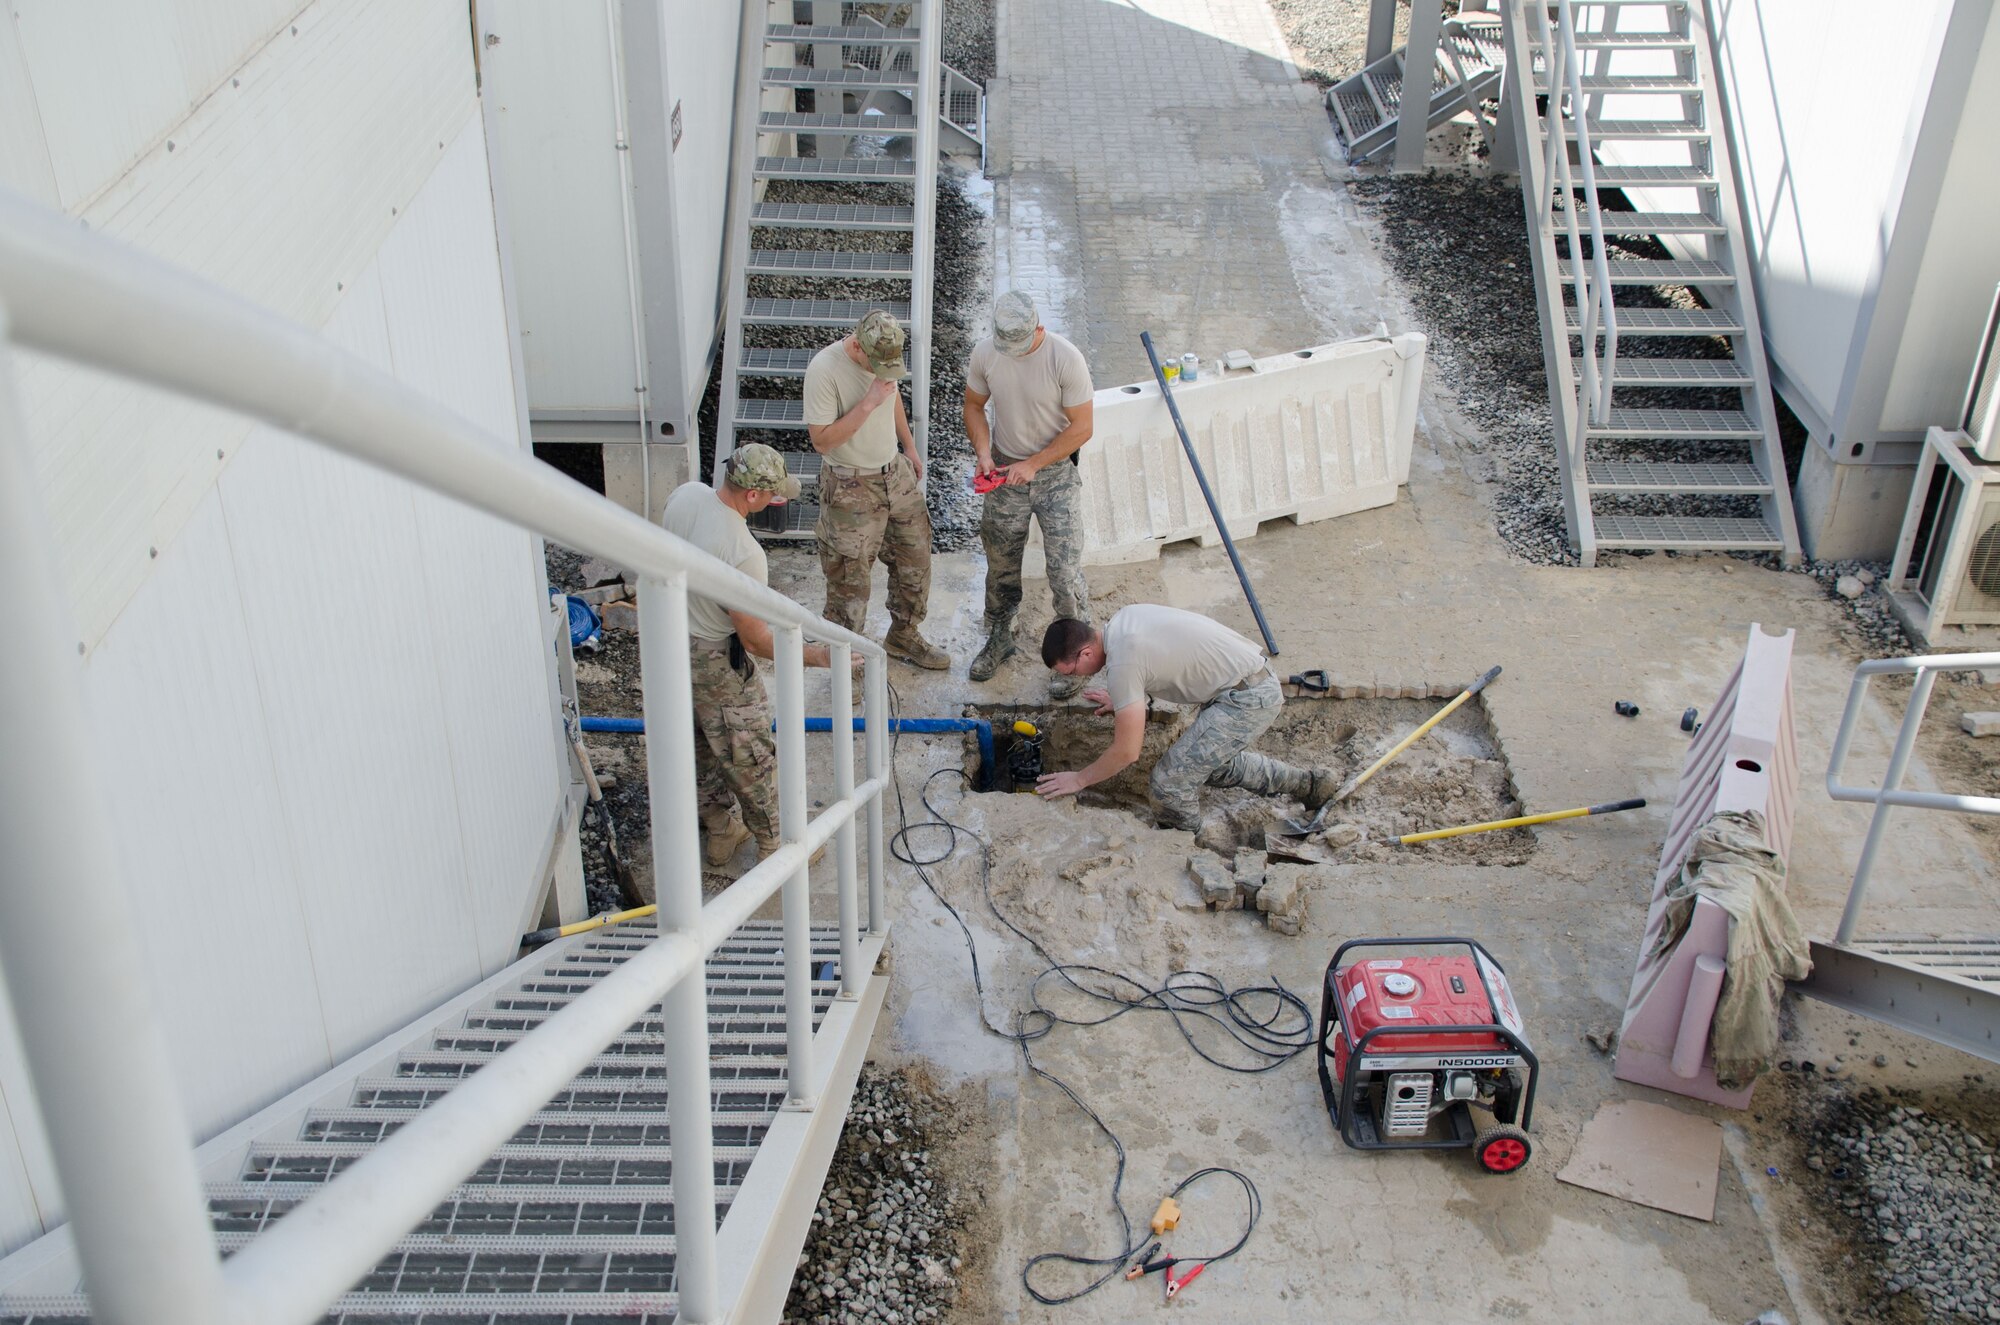 Airmen from the 380th Expeditionary Civil Engineering Squadron, water and fuels systems maintenance repairs a damaged water pipe at Al Dhafra Air Base, United Arab Emirates Jan. 11, 2018.  The ECES team repaired the pipe and restored water supply to deployed personnel. (U.S. Air National Guard photo by Staff Sgt. Colton Elliott)